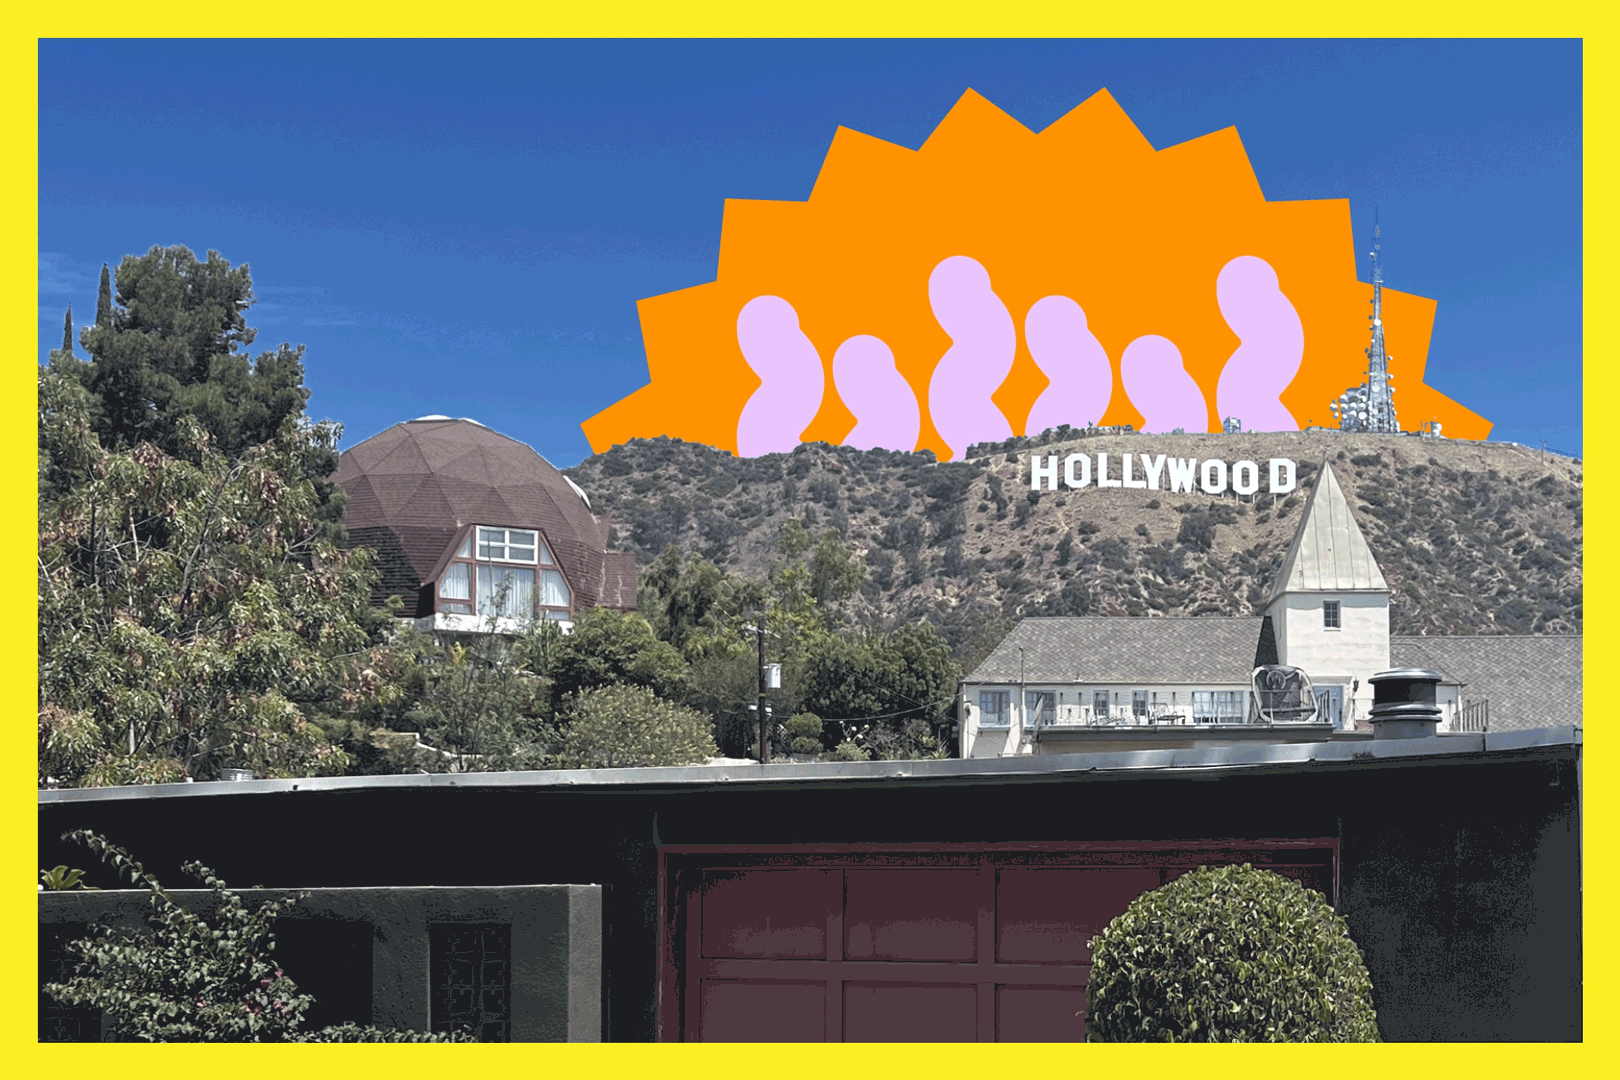 The exterior of a house with the Hollywood sign on the hill in the background and an animated sun